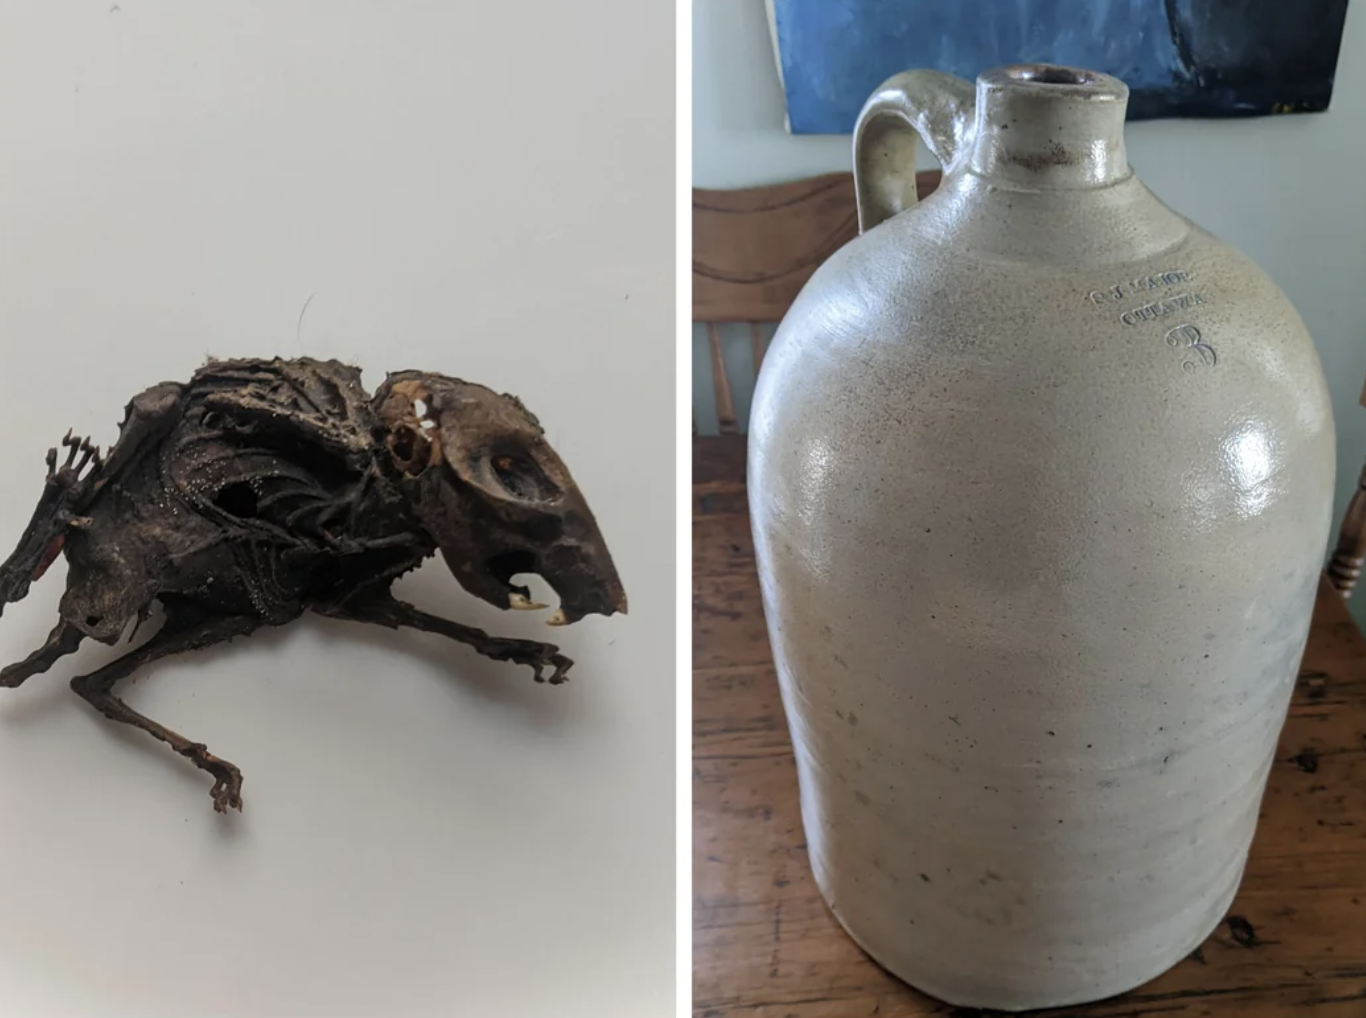 A mummified small animal next to a ceramic jug on a wooden surface